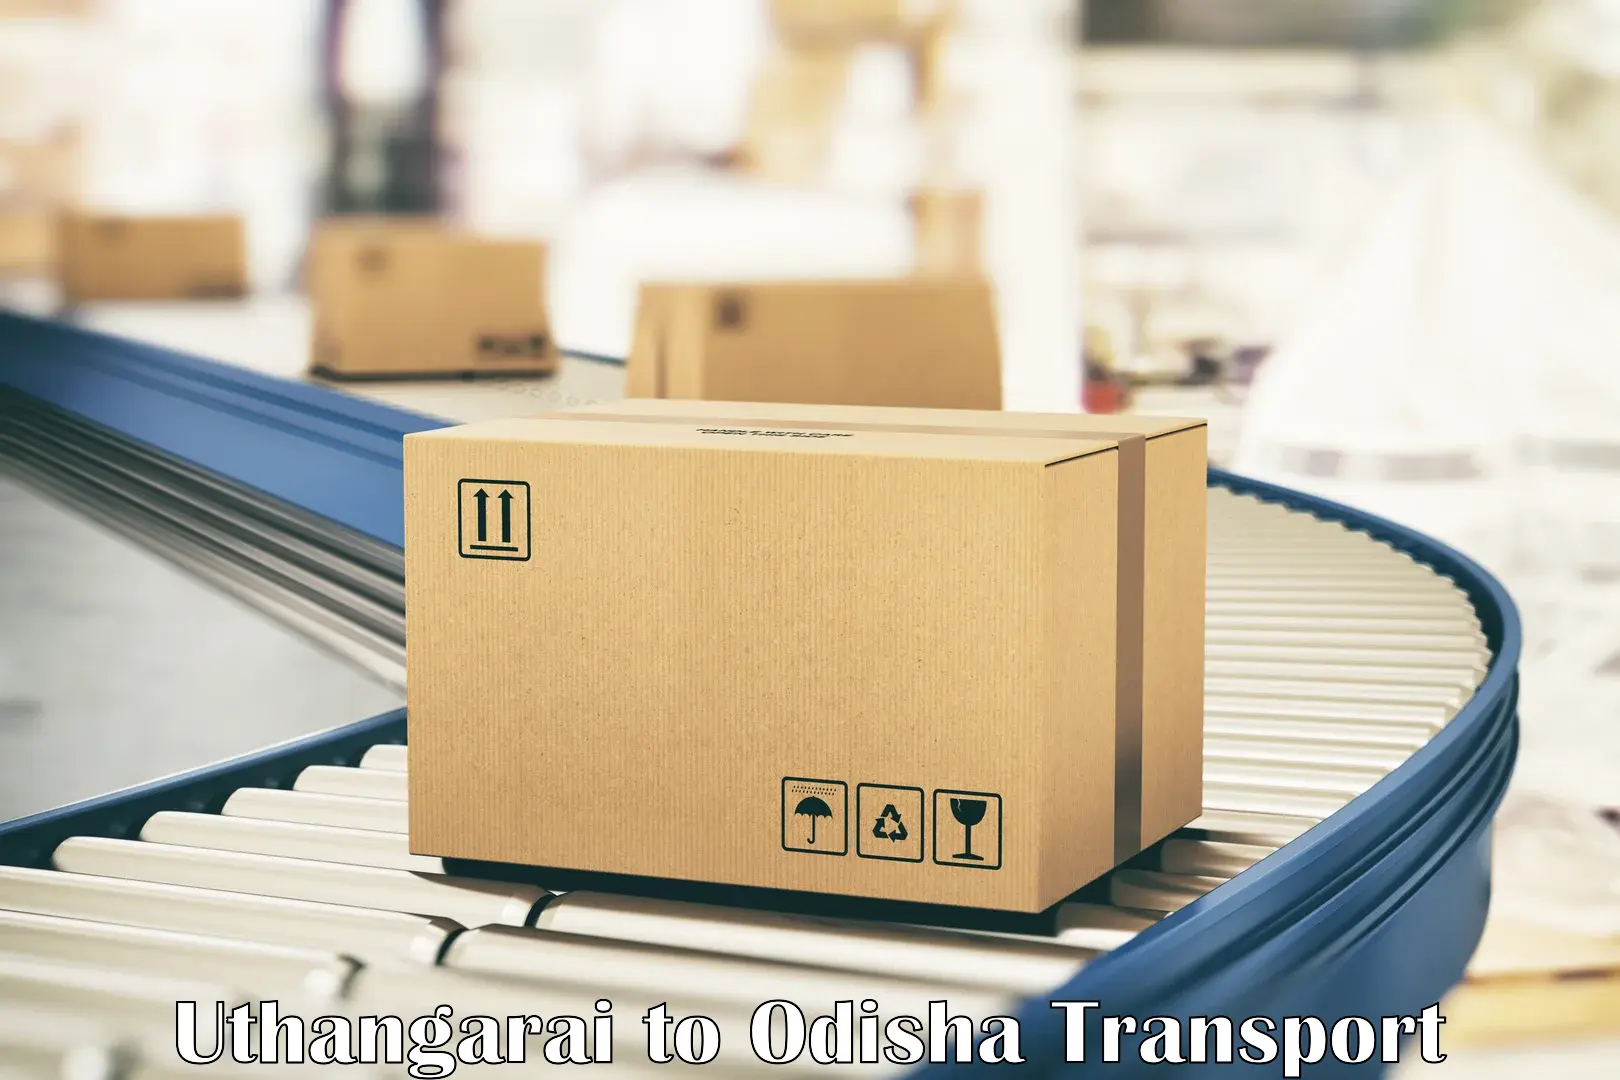 Vehicle transport services in Uthangarai to Kalapathar Cuttack